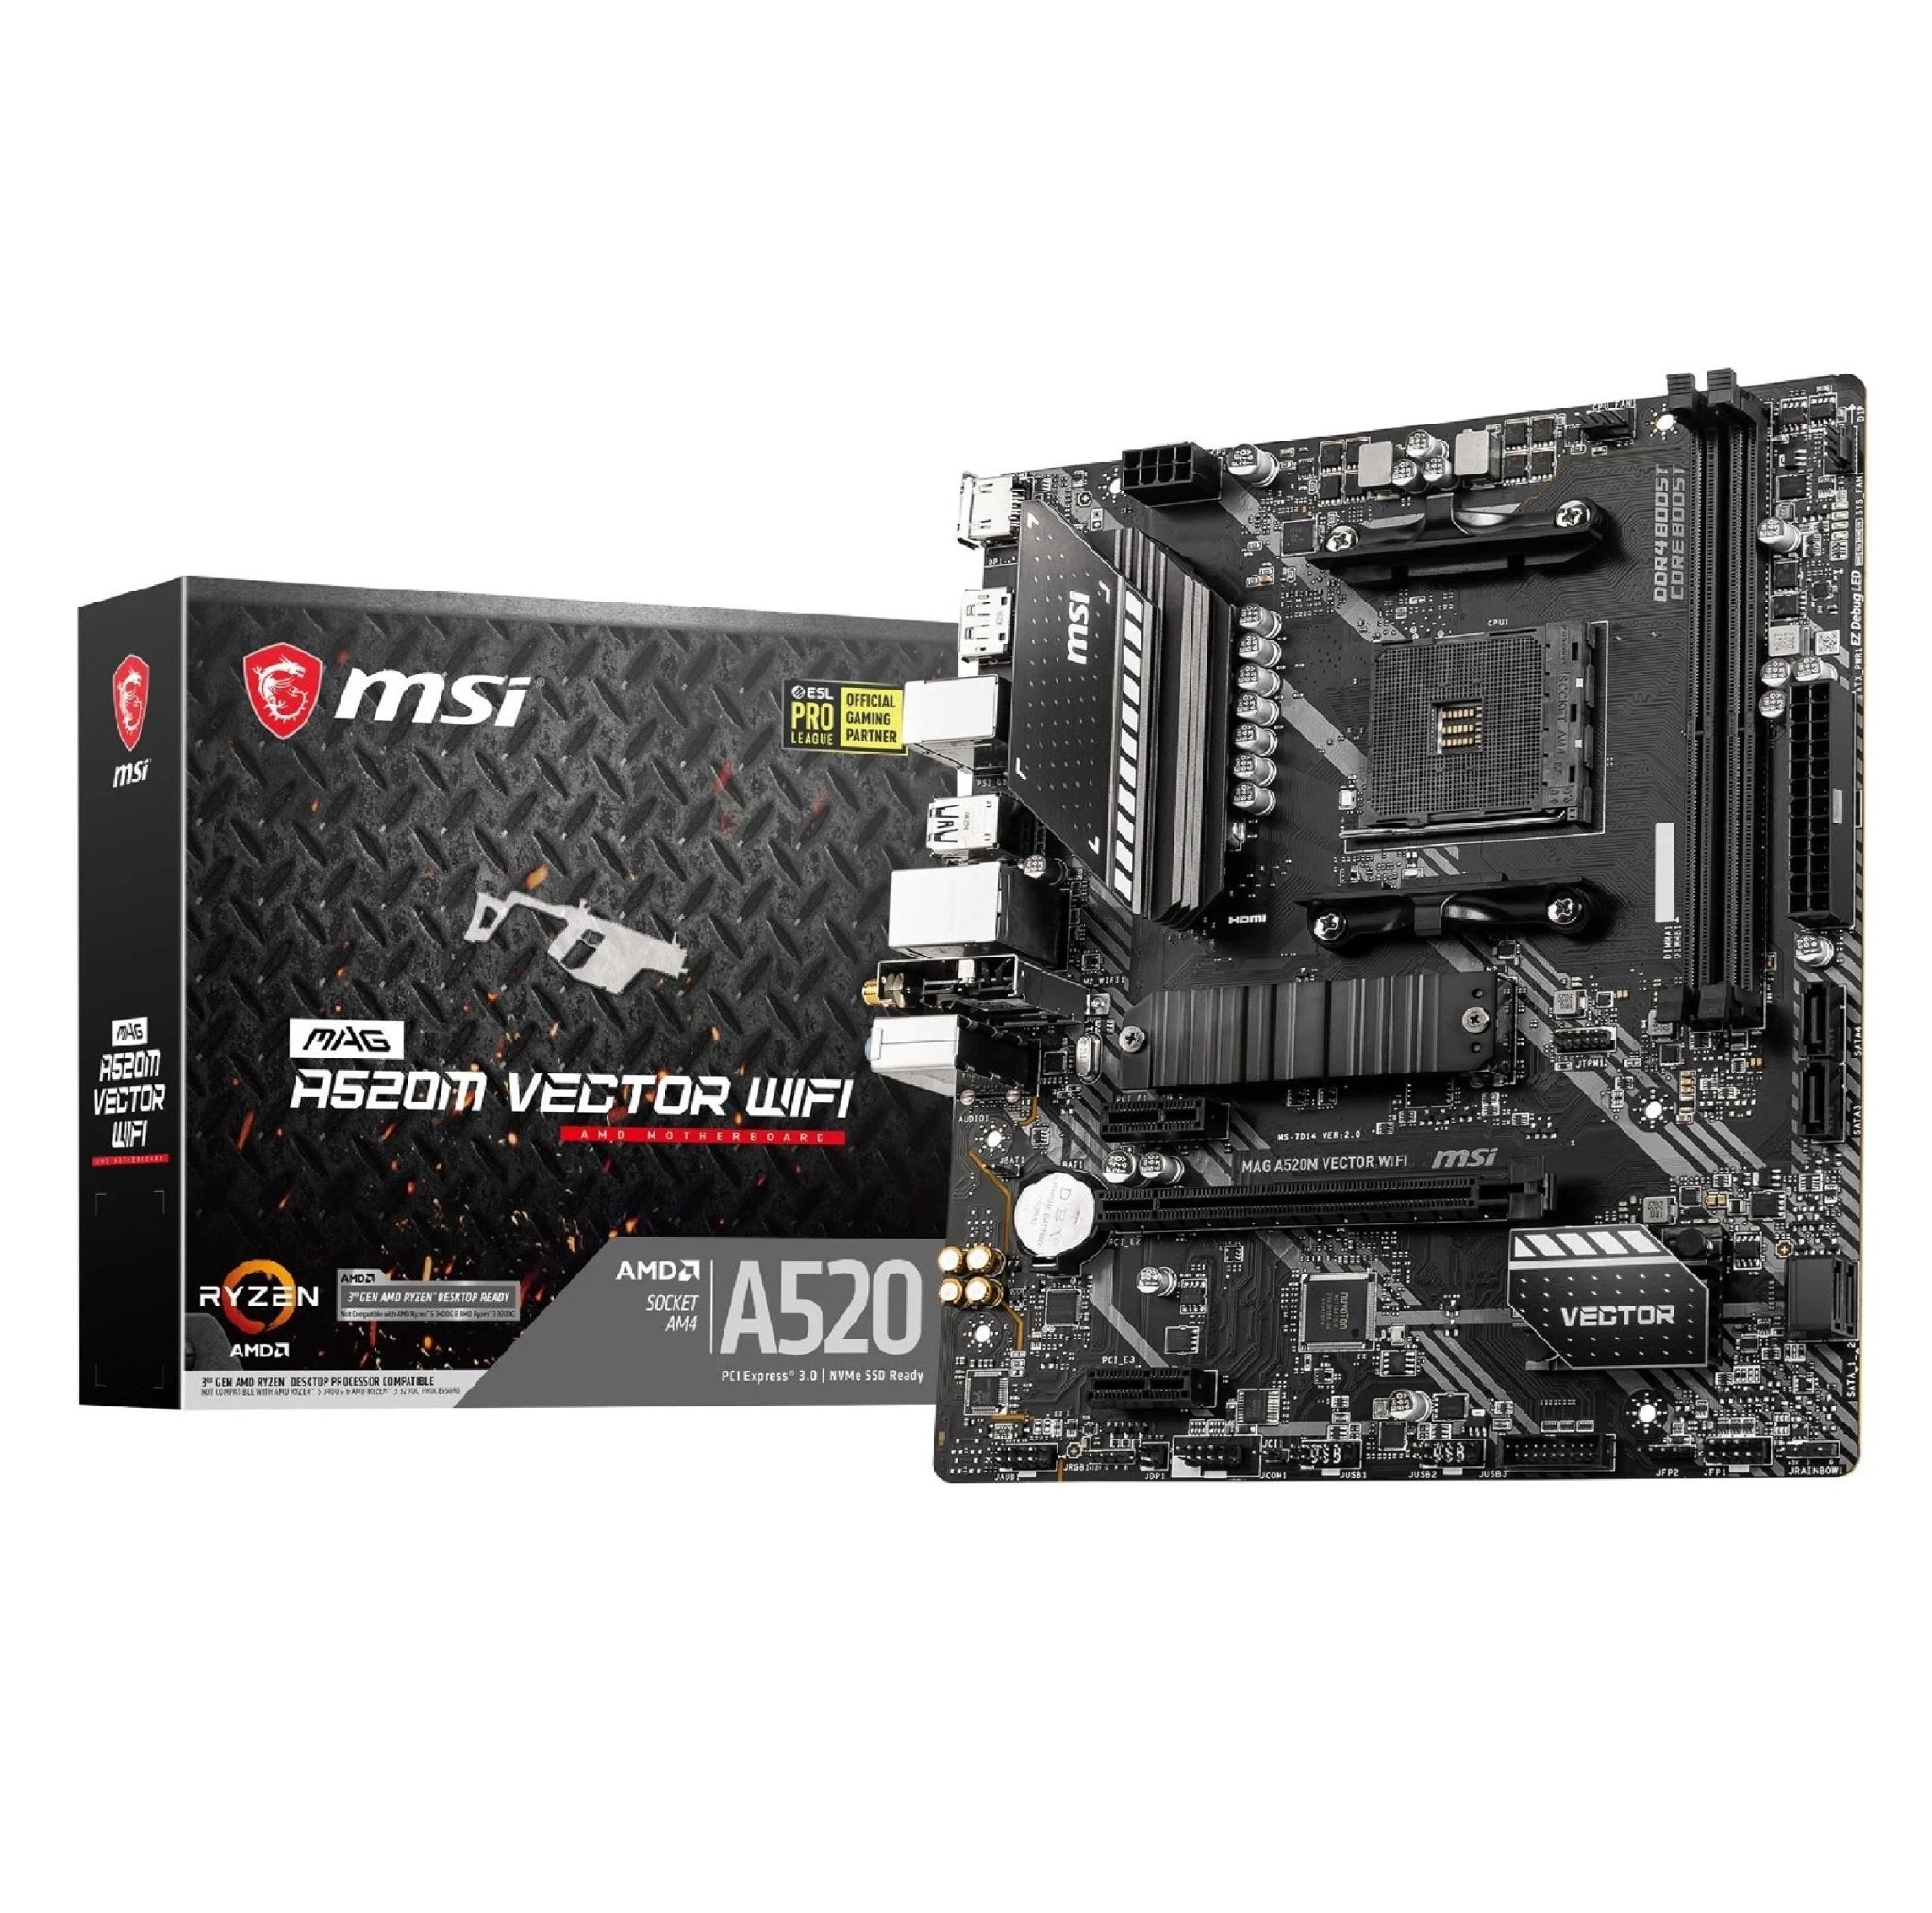 MSI MAG A520M Vector Wifi Motherboard - Store 974 | ستور ٩٧٤